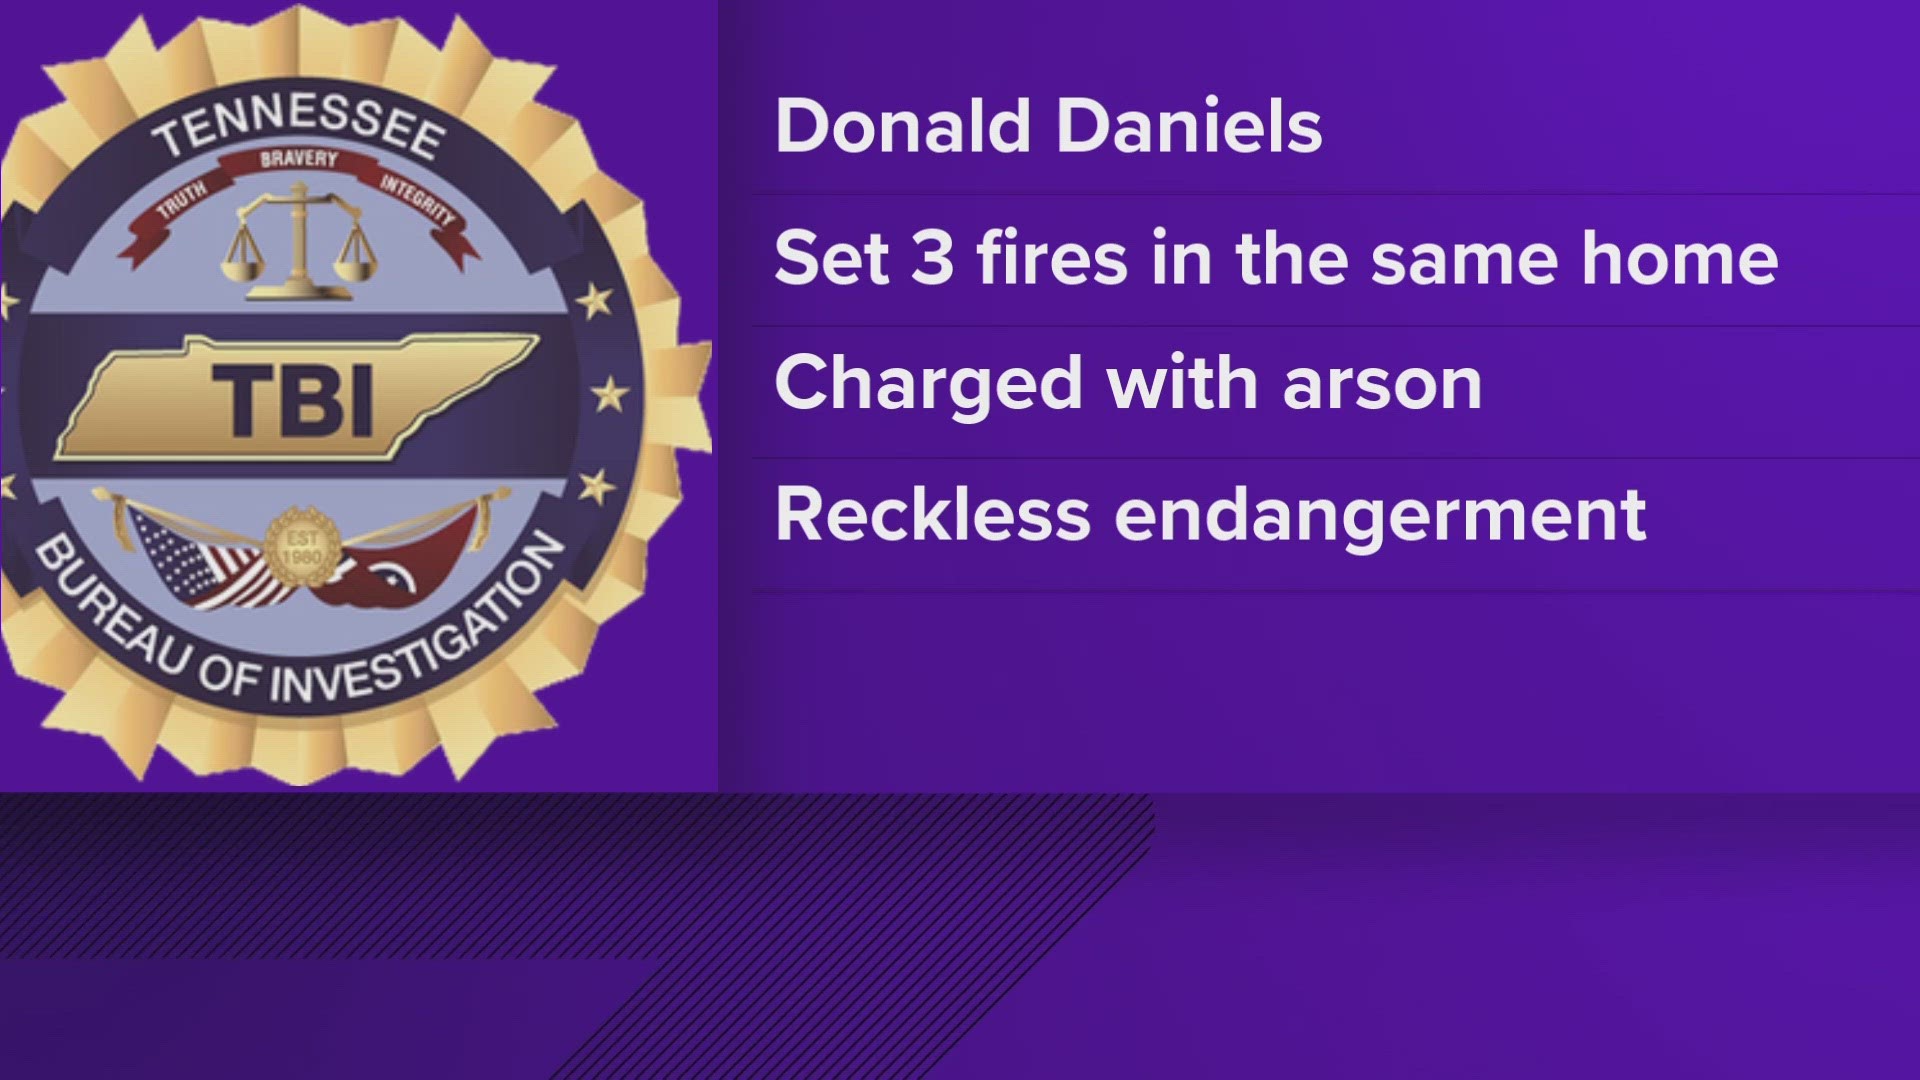 Officials charged Donald White Daniels with arson and reckless endangerment on Tuesday, Aug. 29, according to the Tennessee Bureau of Investigation.